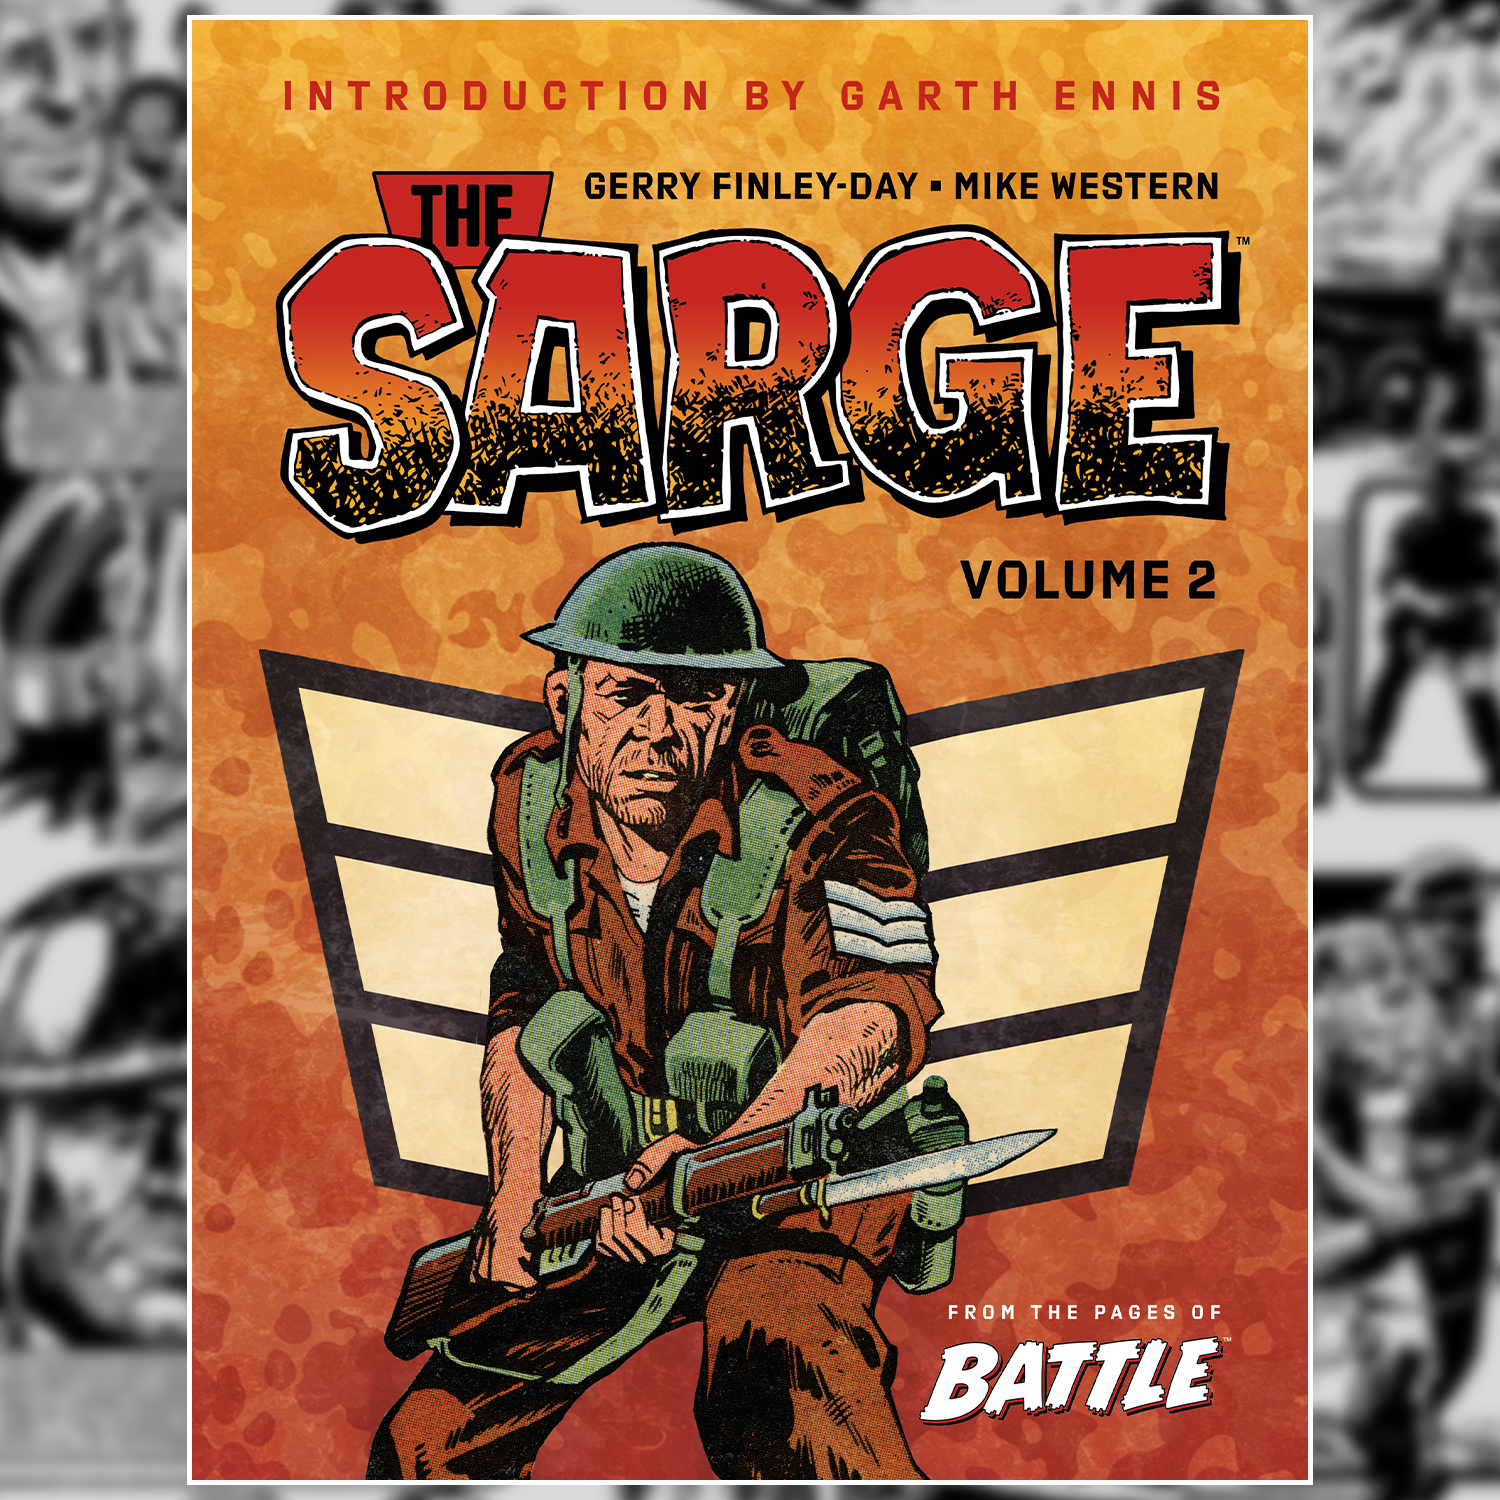 Some Men Are Born Leaders! Pre-Order The Sarge Vol 2 Now!